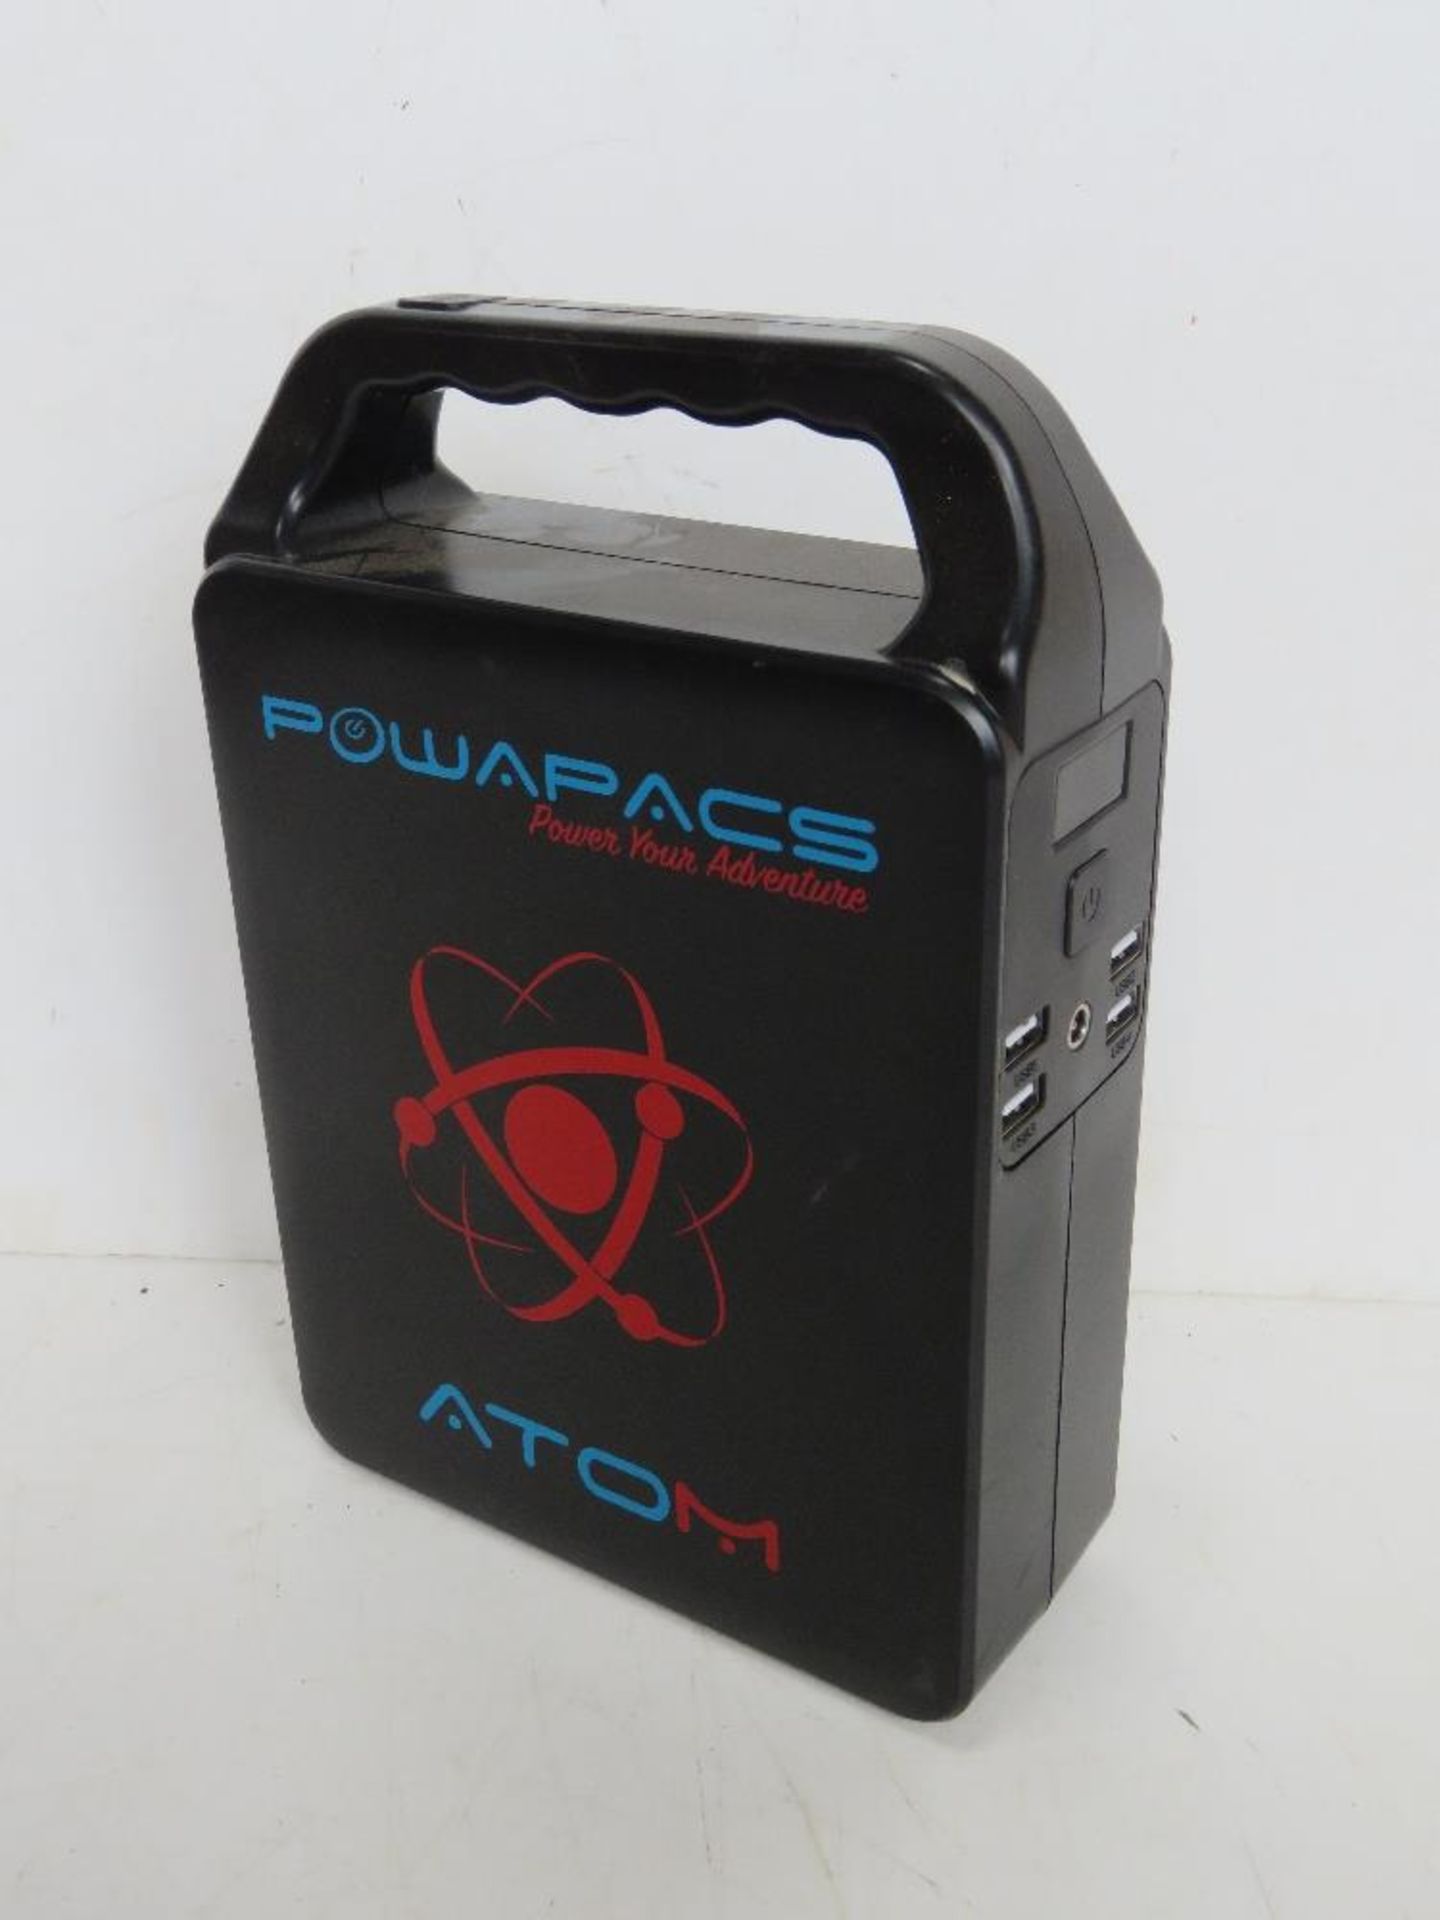 A Powepacs Atom solar generator system Disclaimer - all items in this sale are sold as untested